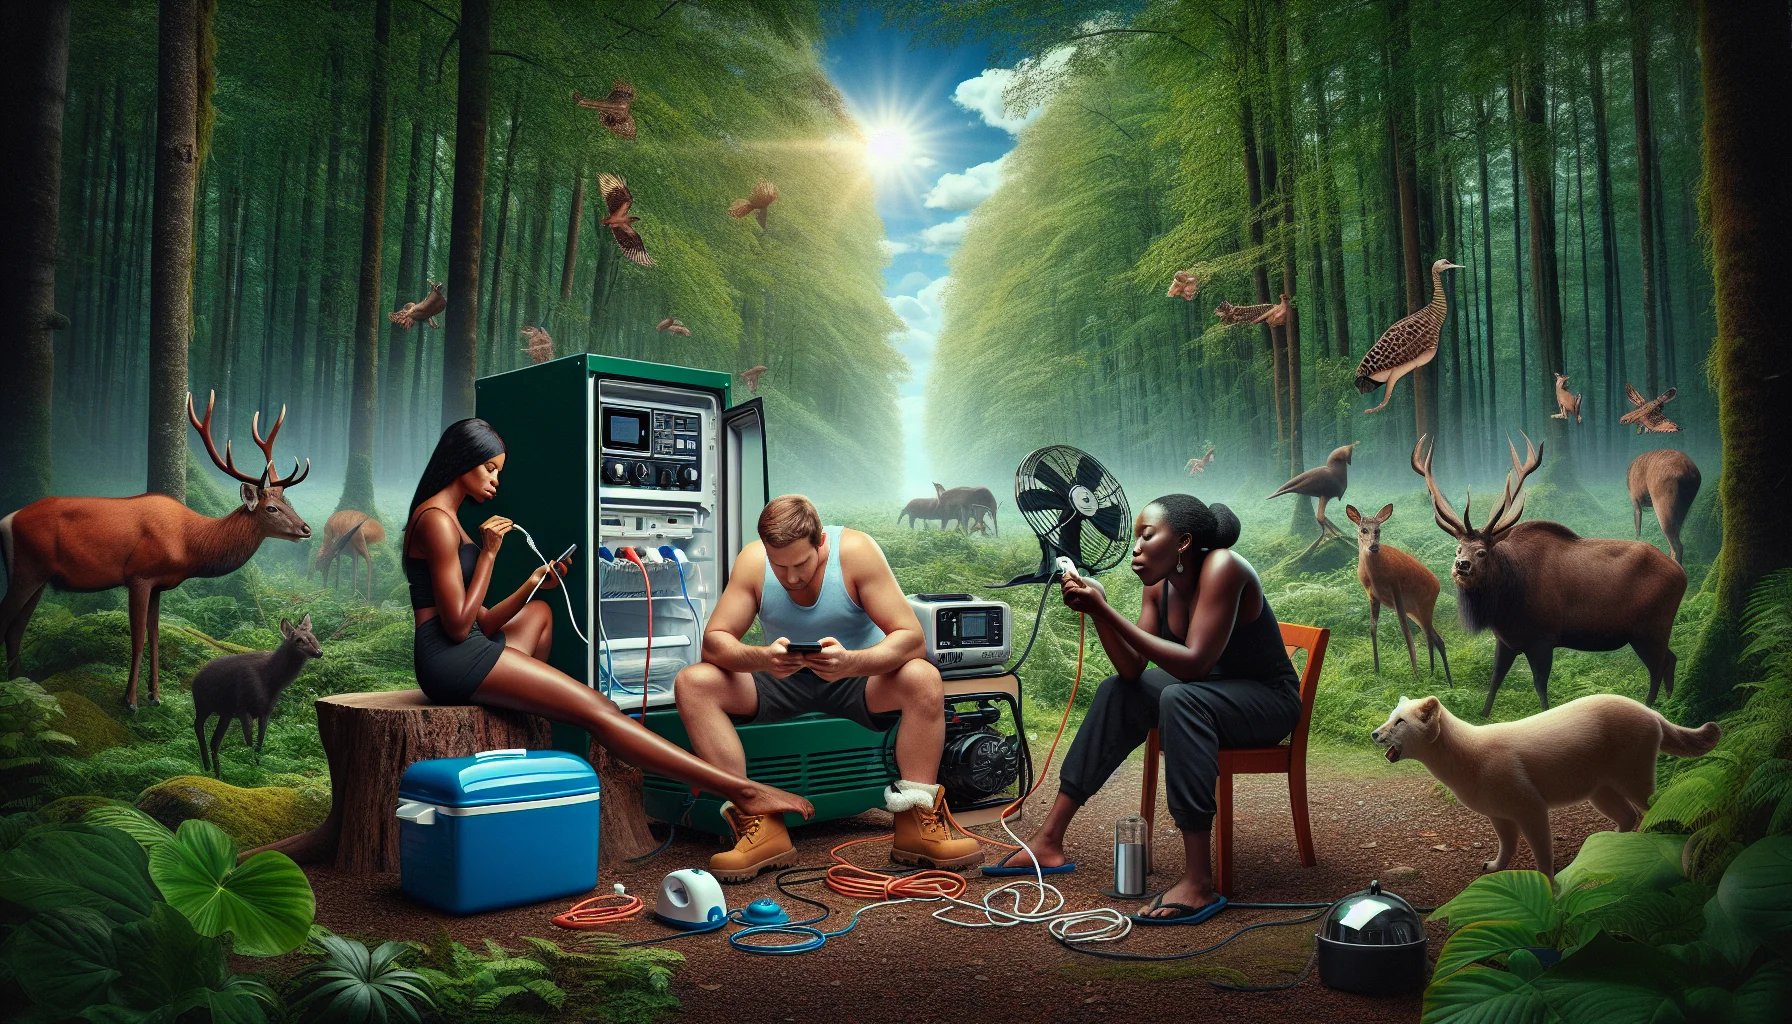 Create a humorous scene that promotes the idea of generating electricity with powerhouse generators. Picture a Caucasian male and a Black female, who are engrossed in using their everyday household appliances in the middle of a lush, remote forest, all powered by a large, humming generator. They are surrounded by curious wildlife. Included are many amenities usually associated with modern urban life, such as a fridge, a TV, an electric toothbrush, and a food mixer among others. The contrast between the natural setting and the artificial amenities, powered by the robust generator, makes for a hilariously absurd scene.